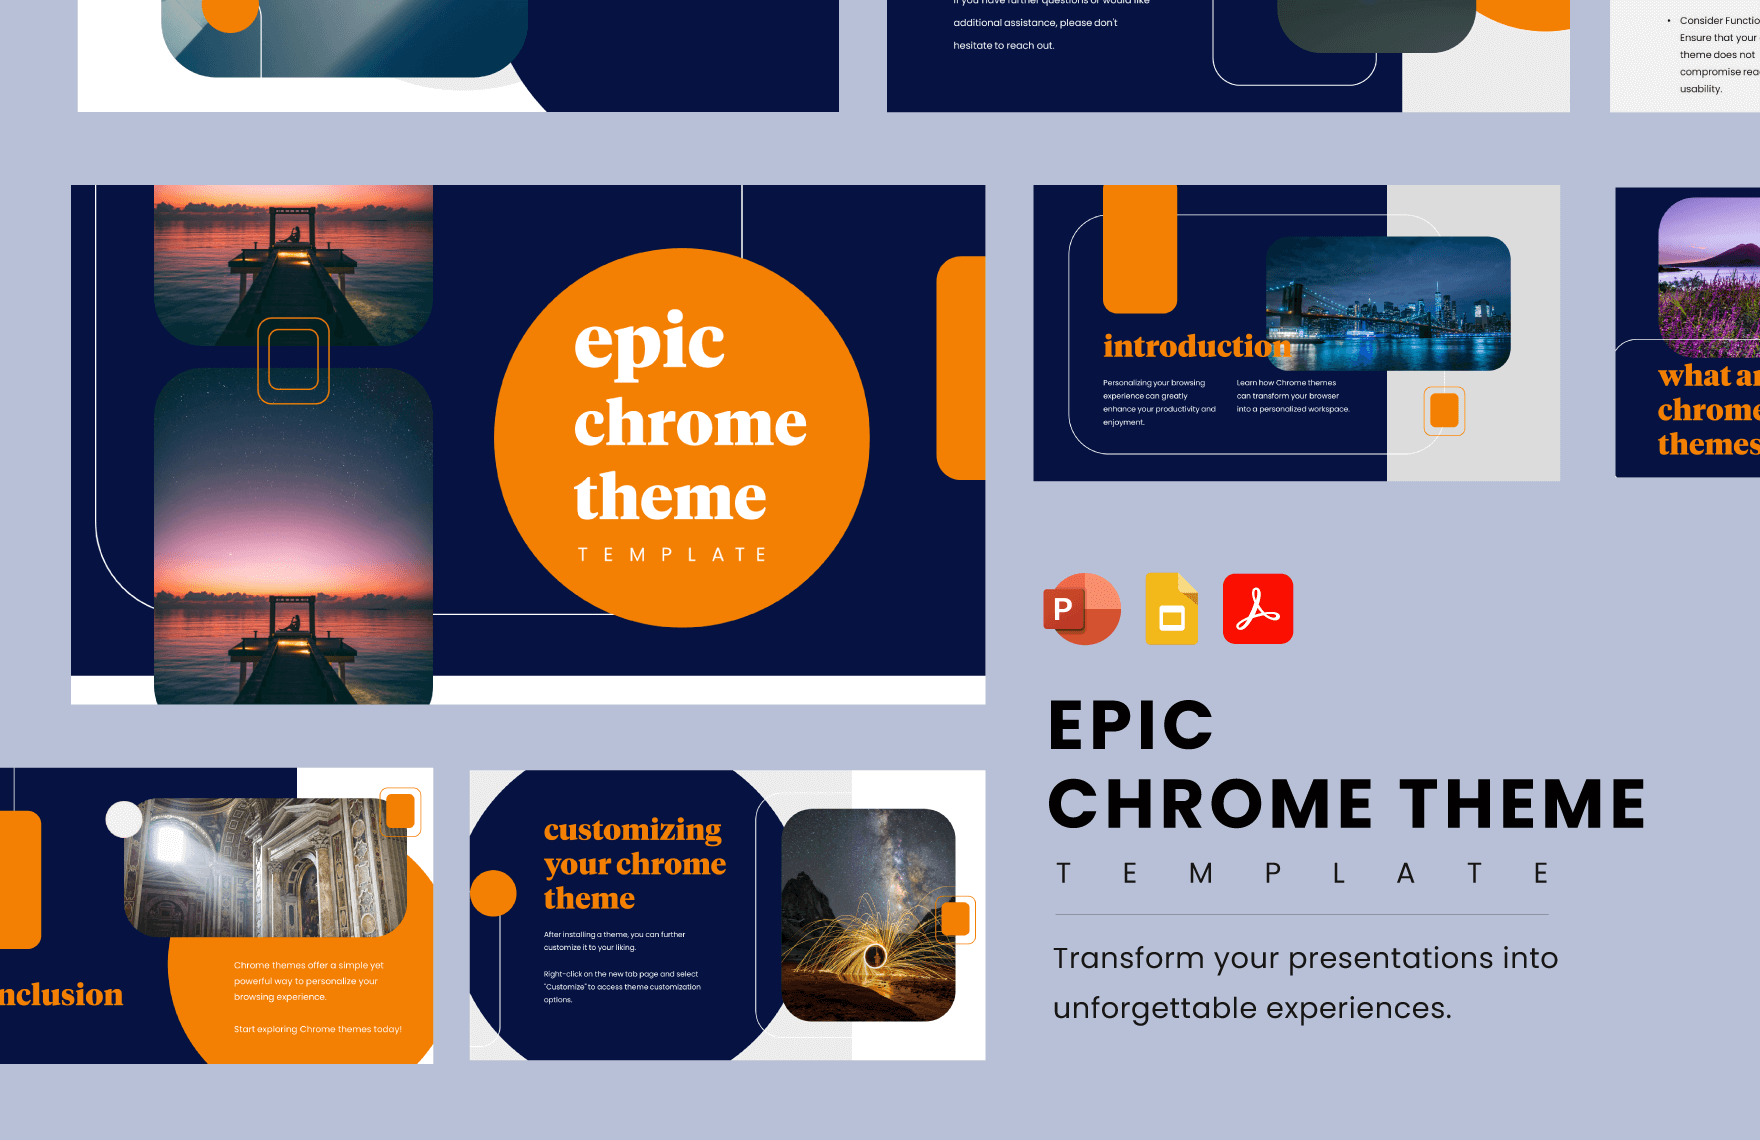 Epic Chrome Themes Template in PDF, PowerPoint, Google Slides